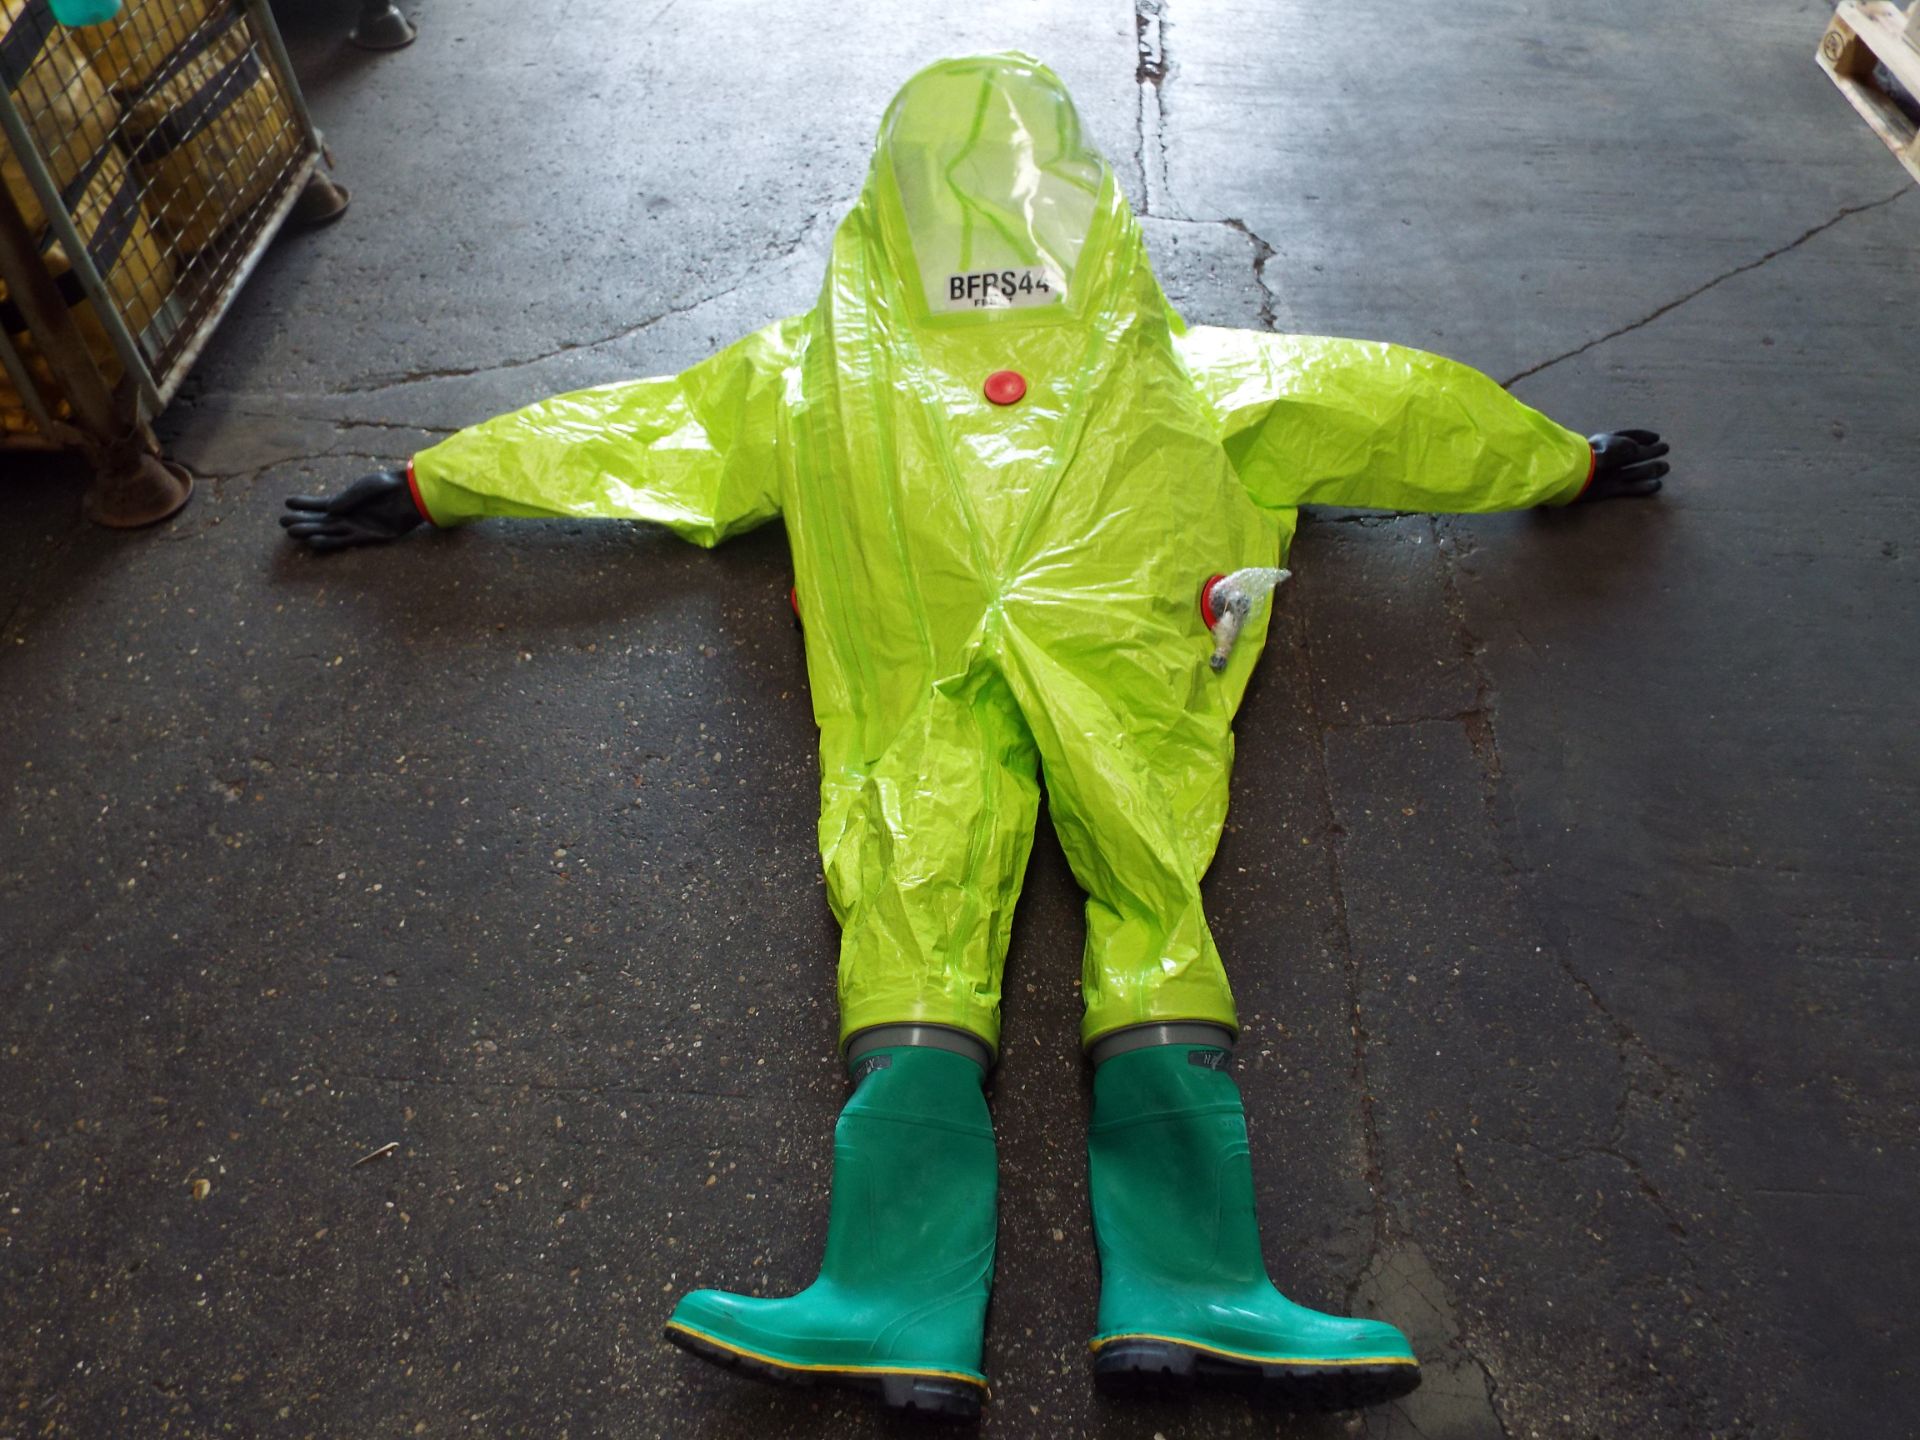 Respirex Tychem TK Gas-Tight Hazmat Suit Type 1A with Attached Boots and Gloves - Image 4 of 12